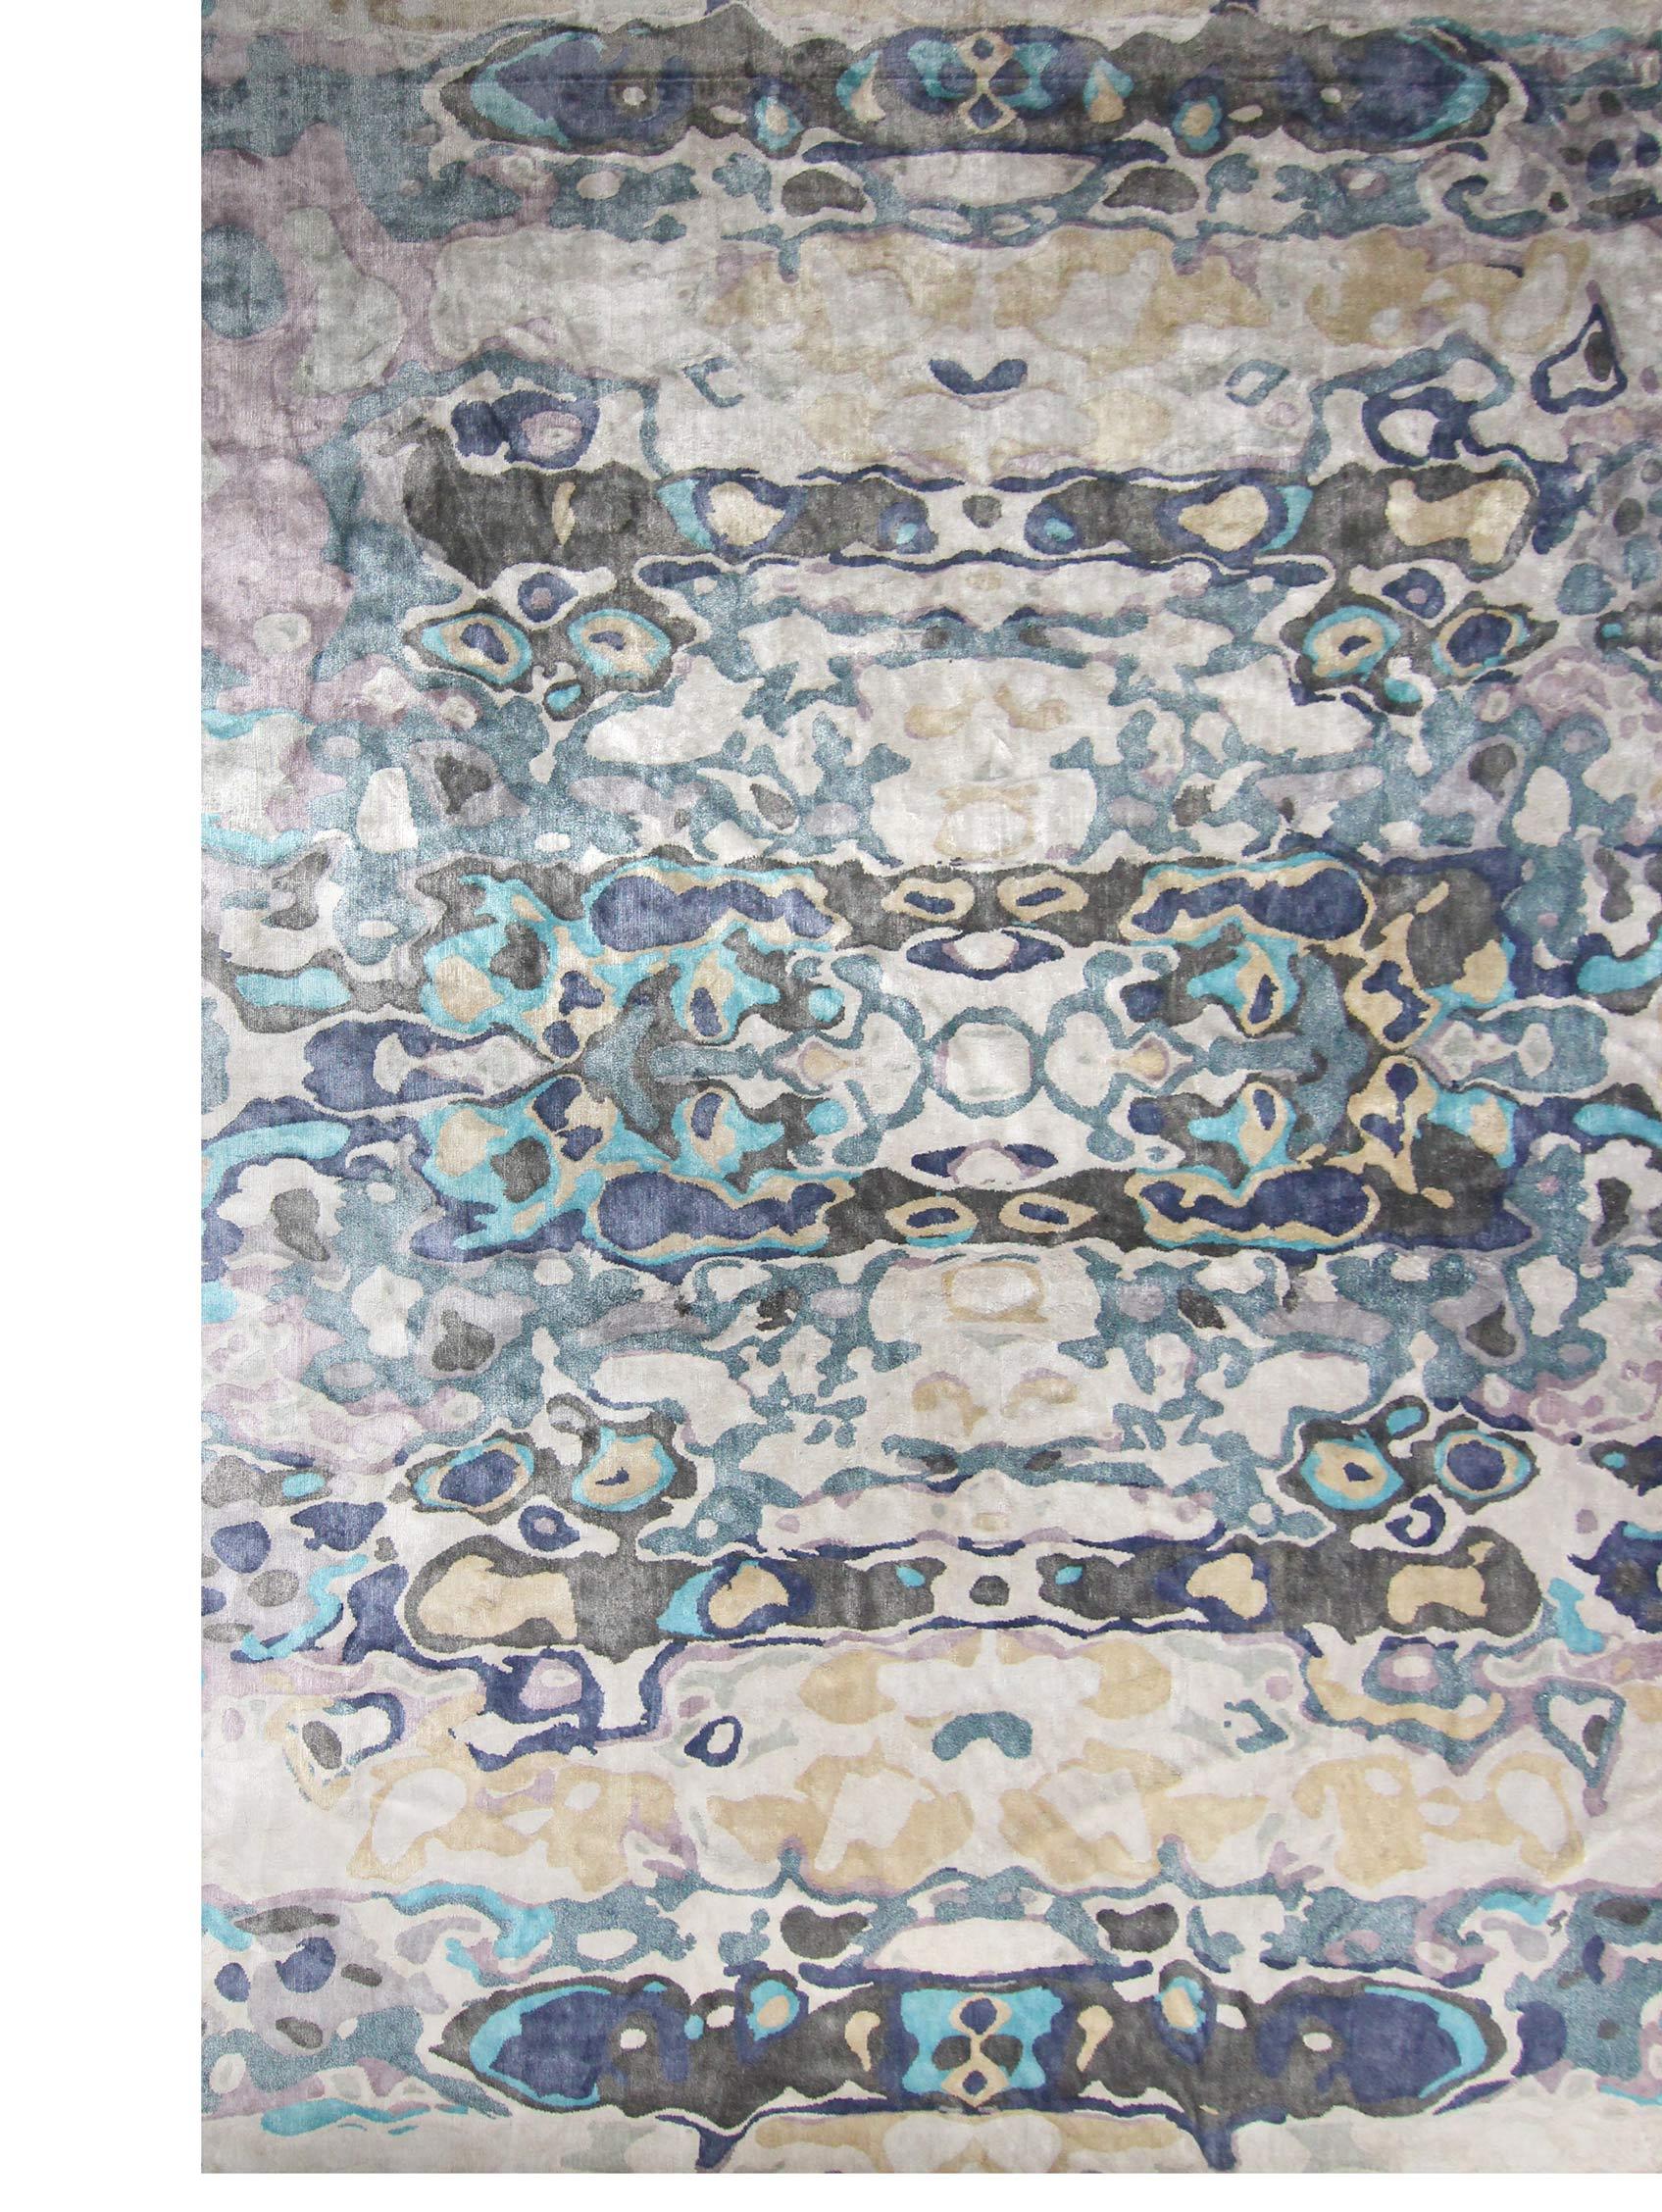 Expo hand knotted rug by Eskayel
Dimensions: D 14' x H 9.4'
Pile Height: 4 mm 
Materials: 100% Bamboo silk.

Eskayel hand knotted rugs are woven to order and can be customized in various sizes, colors, materials, and weave constructions.